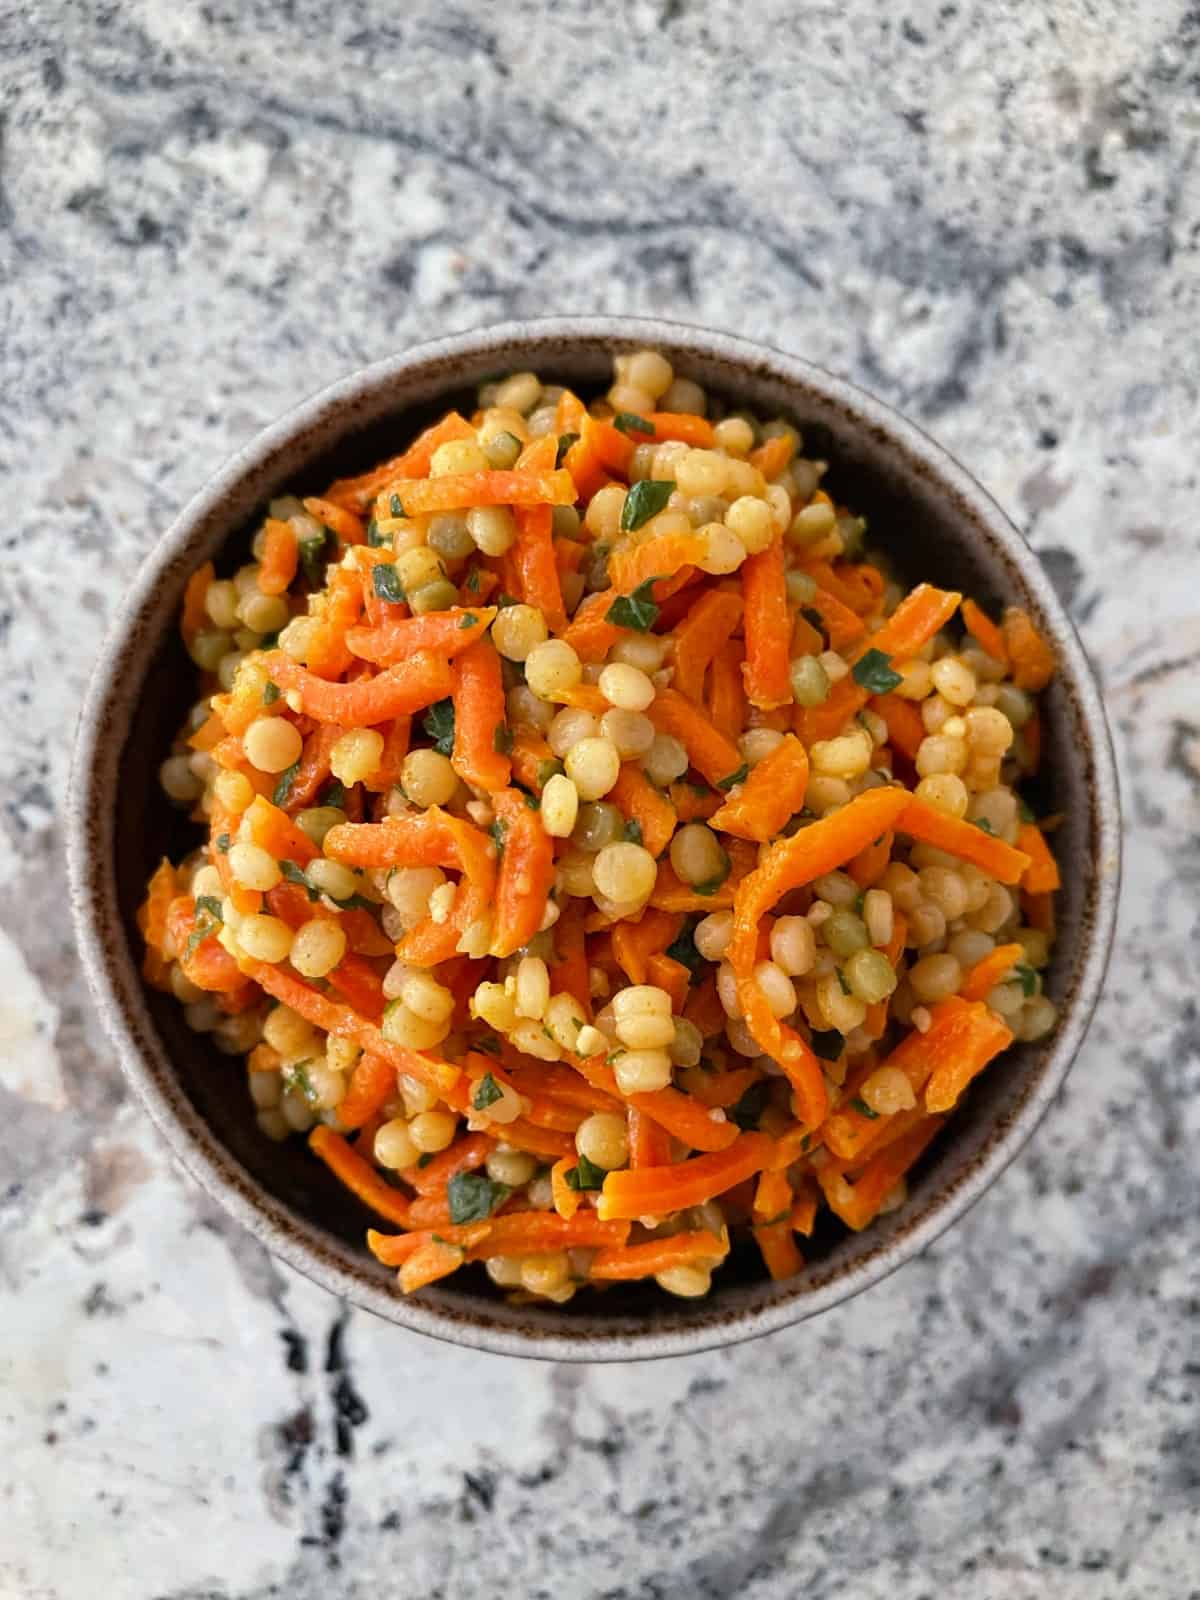 Moroccan carrot couscous salad in ceramic bowl.